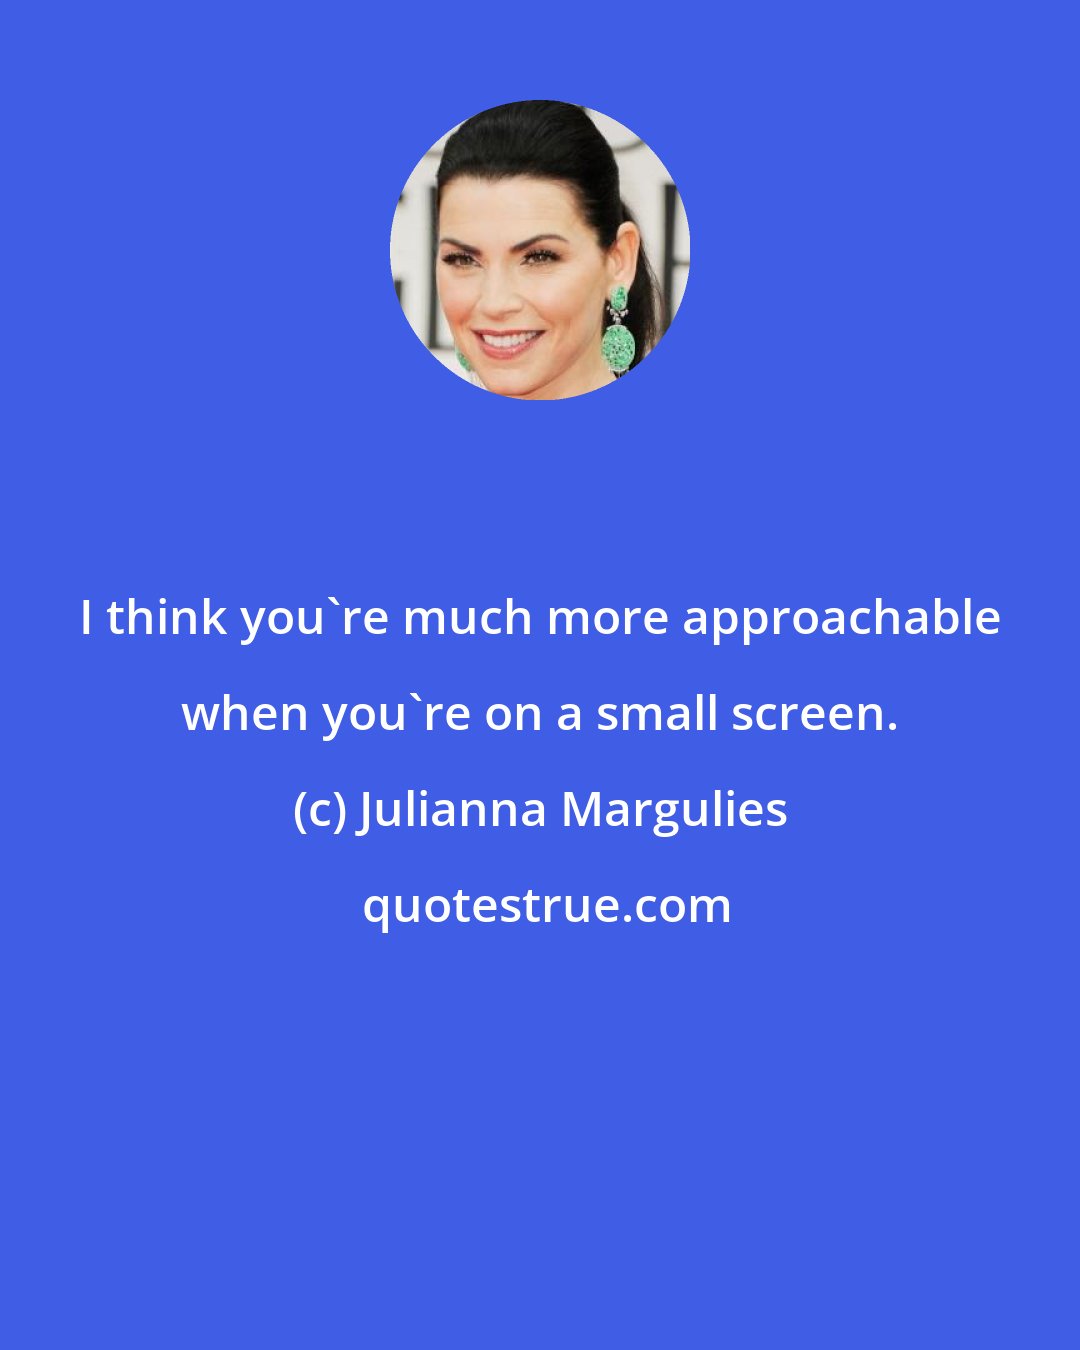 Julianna Margulies: I think you're much more approachable when you're on a small screen.